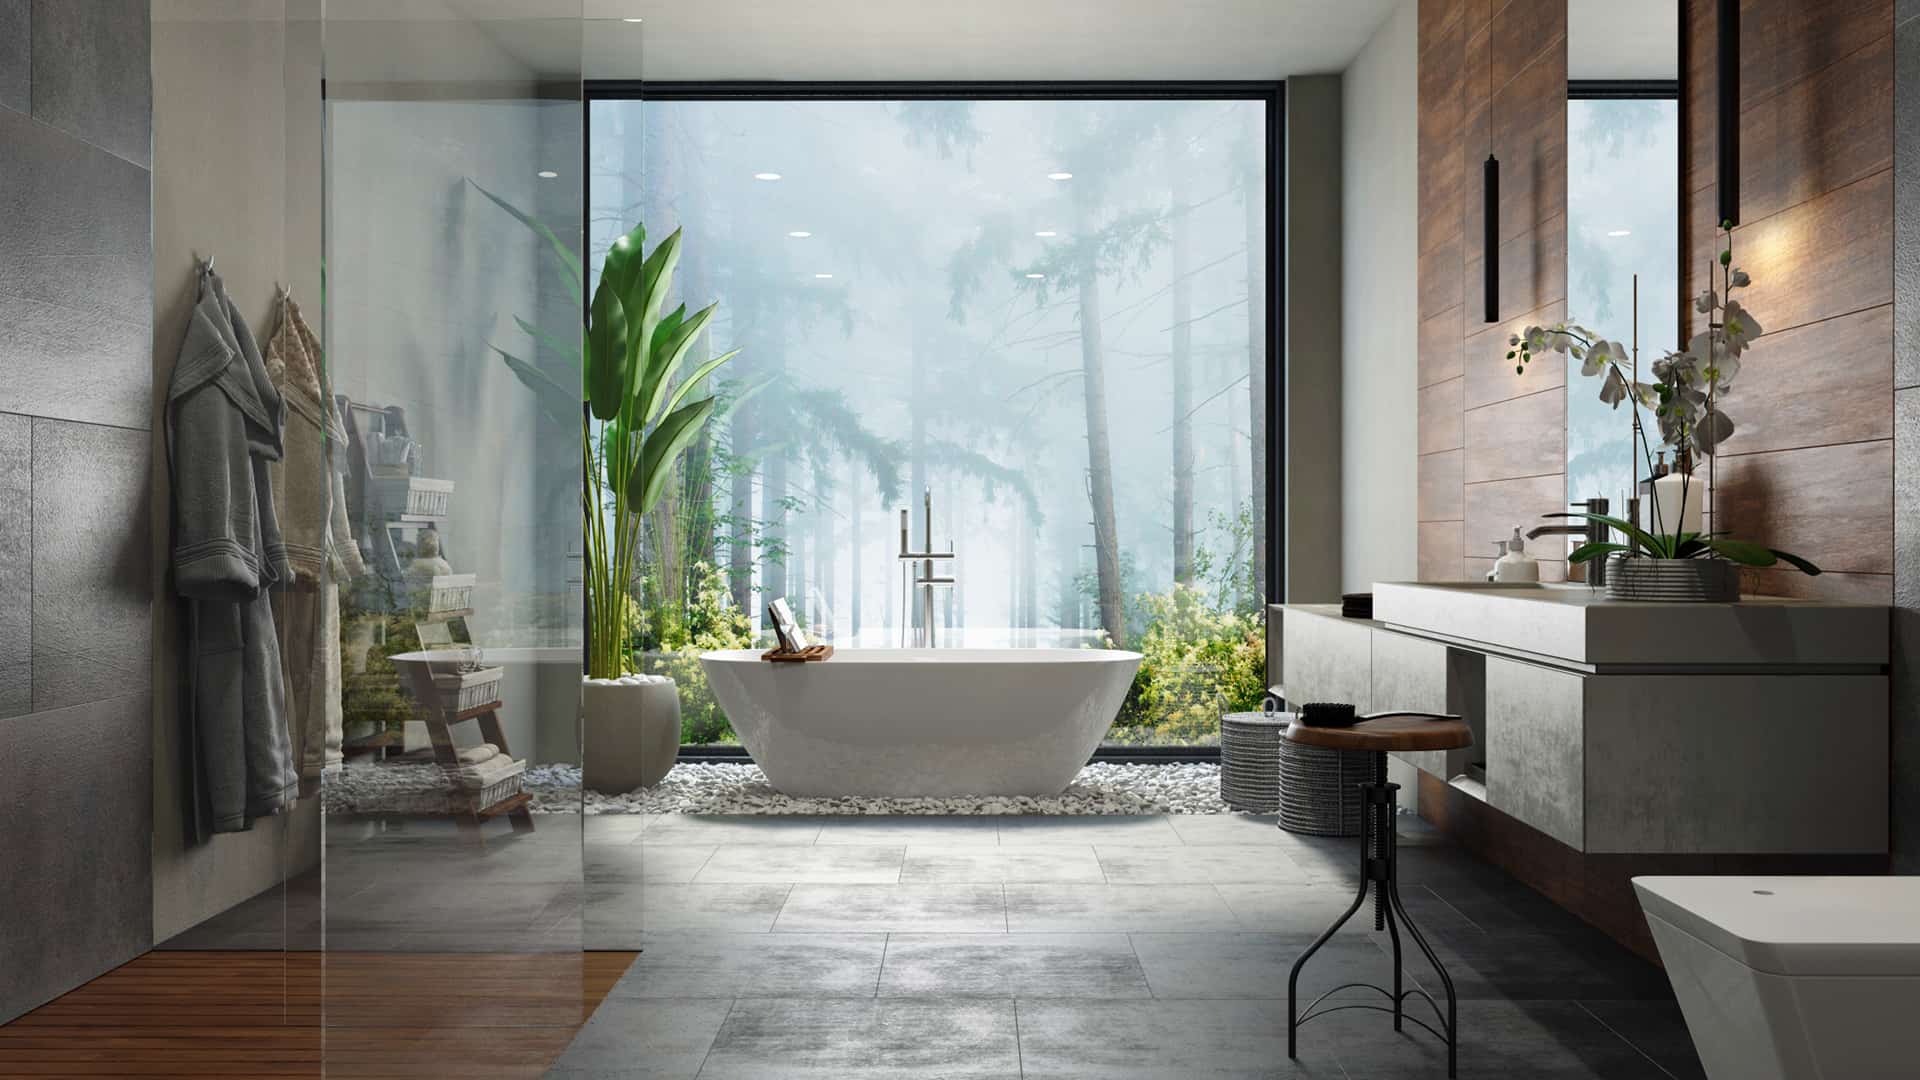 Bathroom accessories for a luxurious spa-like experience